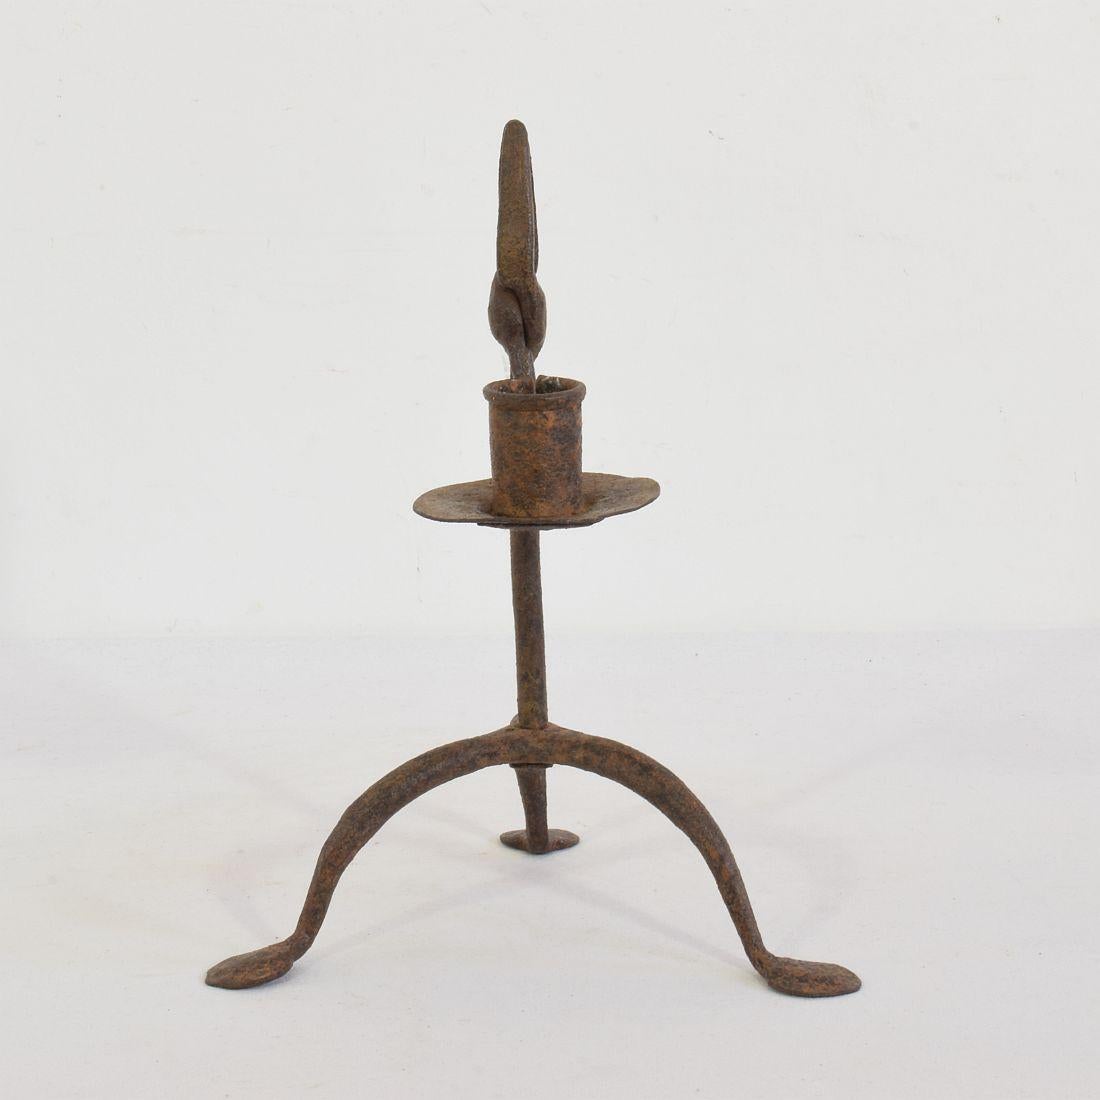 18th-19th Century Hand Forged Iron Candleholder 3